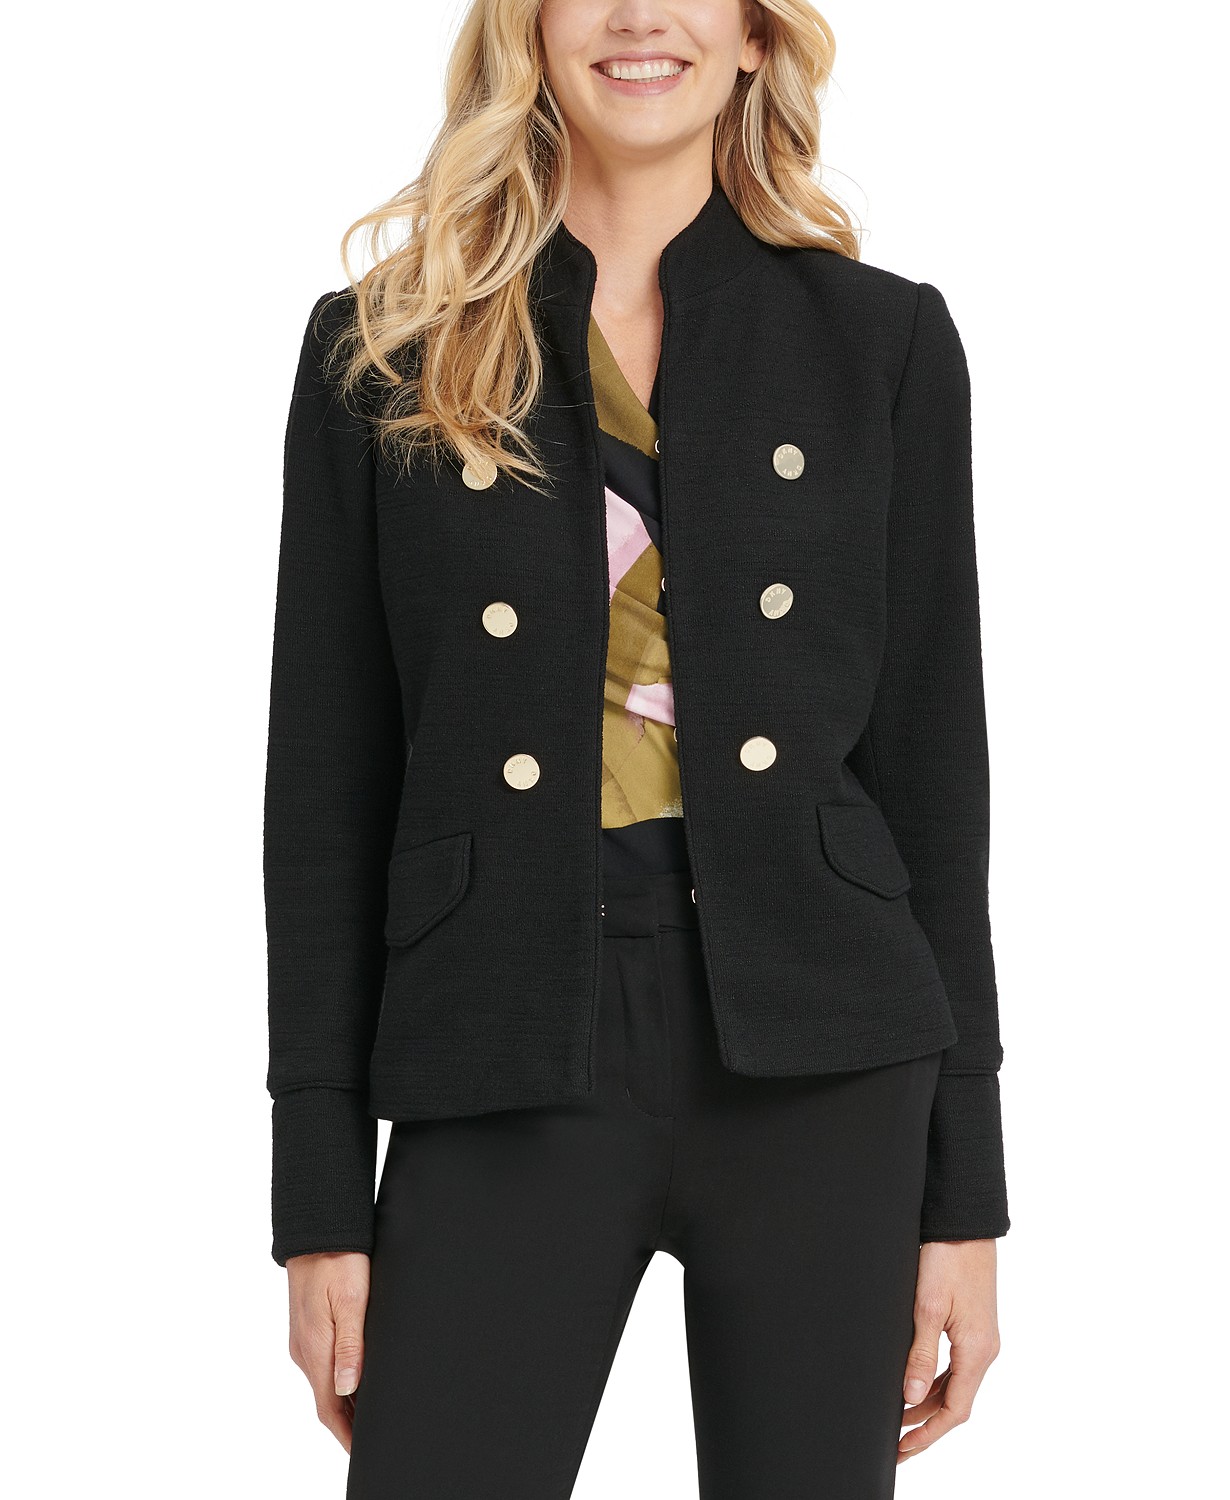 DKNY Women's Stand-Collar Double-Breasted Military Jacket Black Size 2